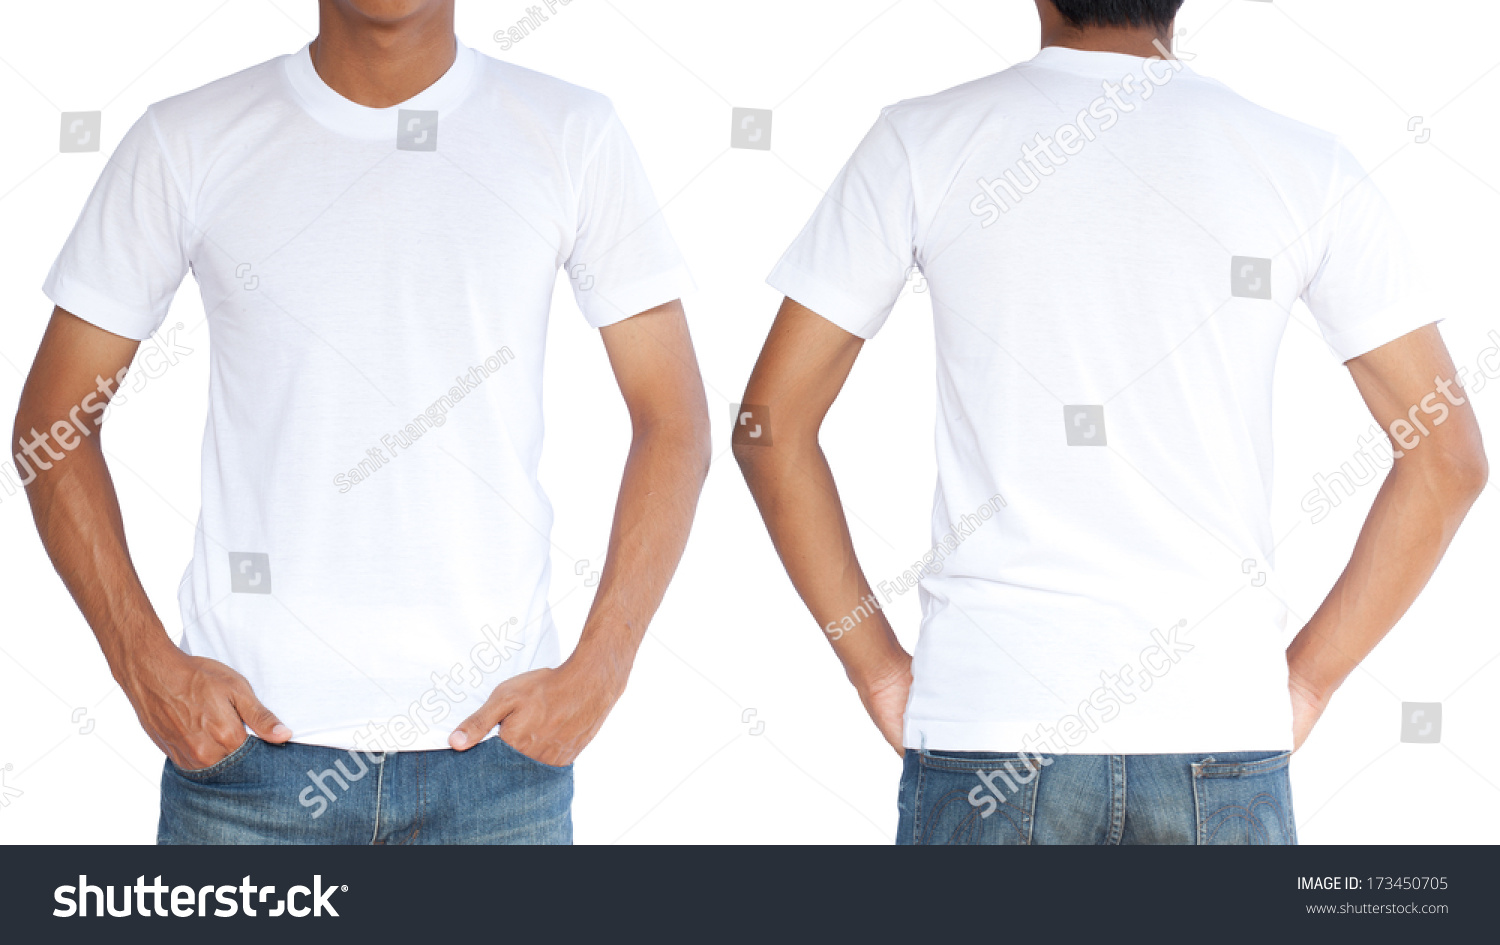 Download White Tshirt On Young Man Template Stock Photo 173450705 ...